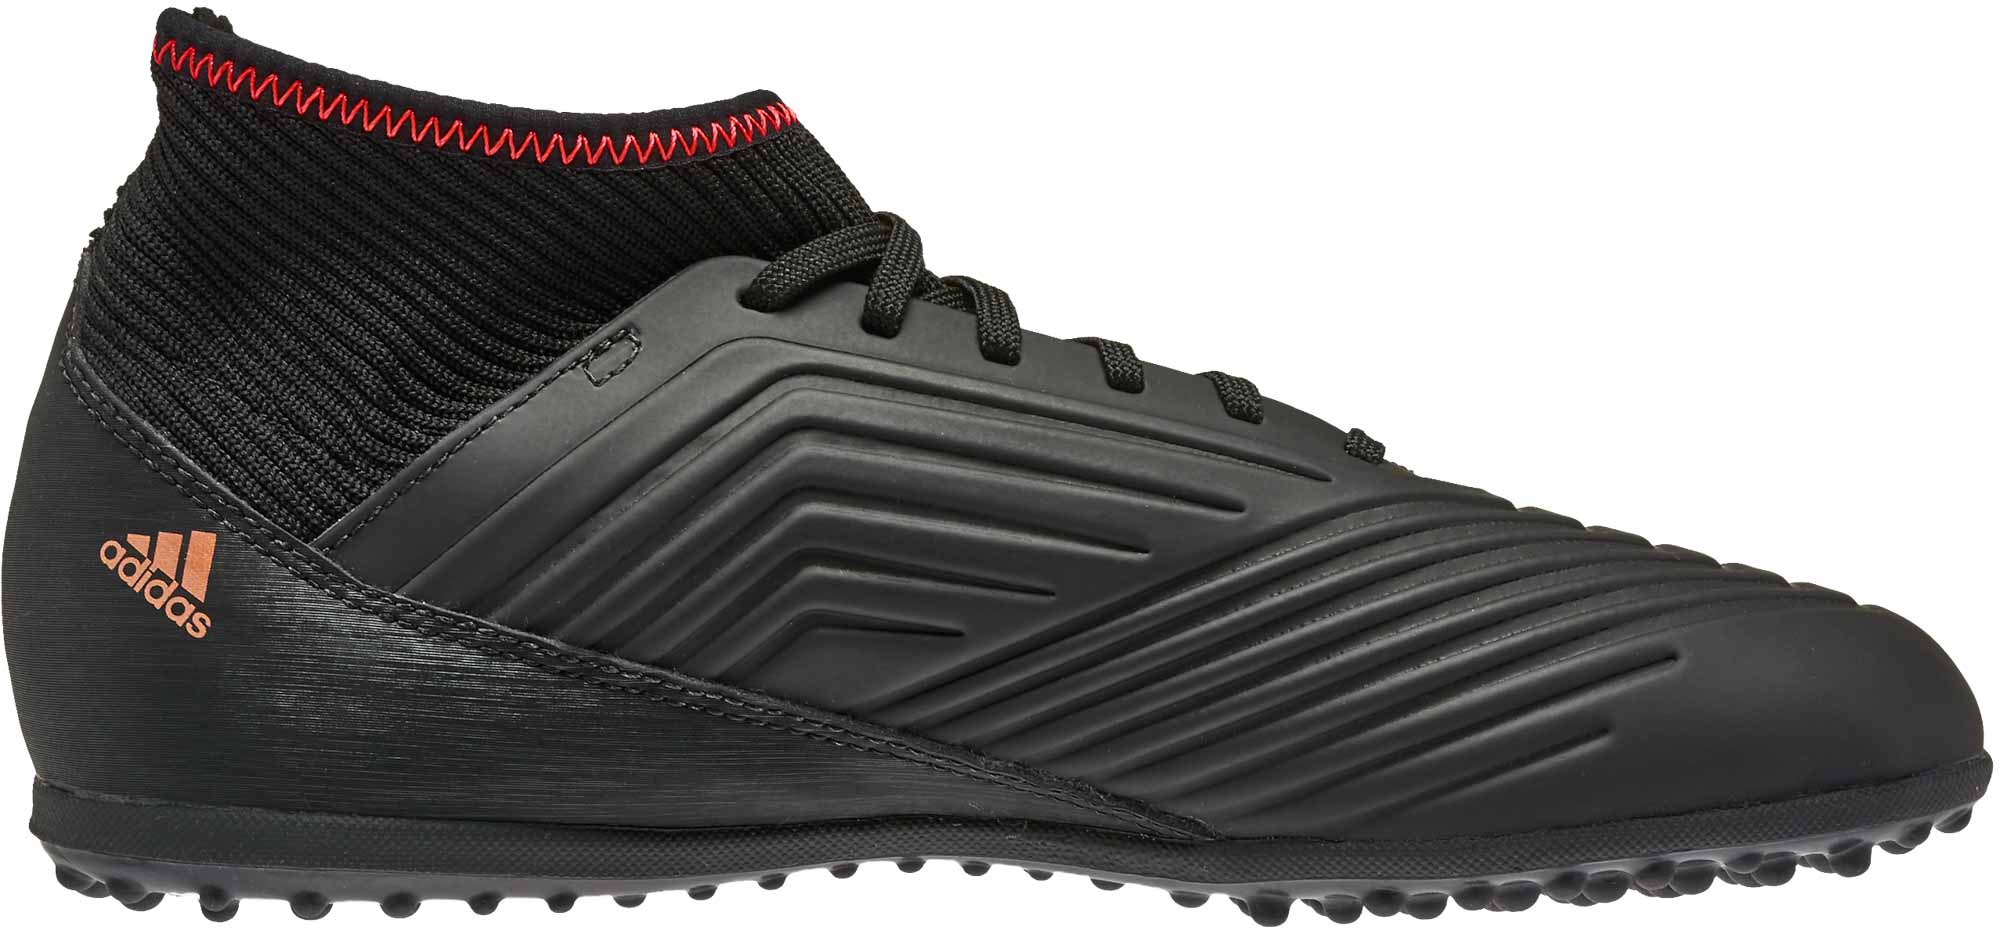 indoor soccer shoes youth adidas